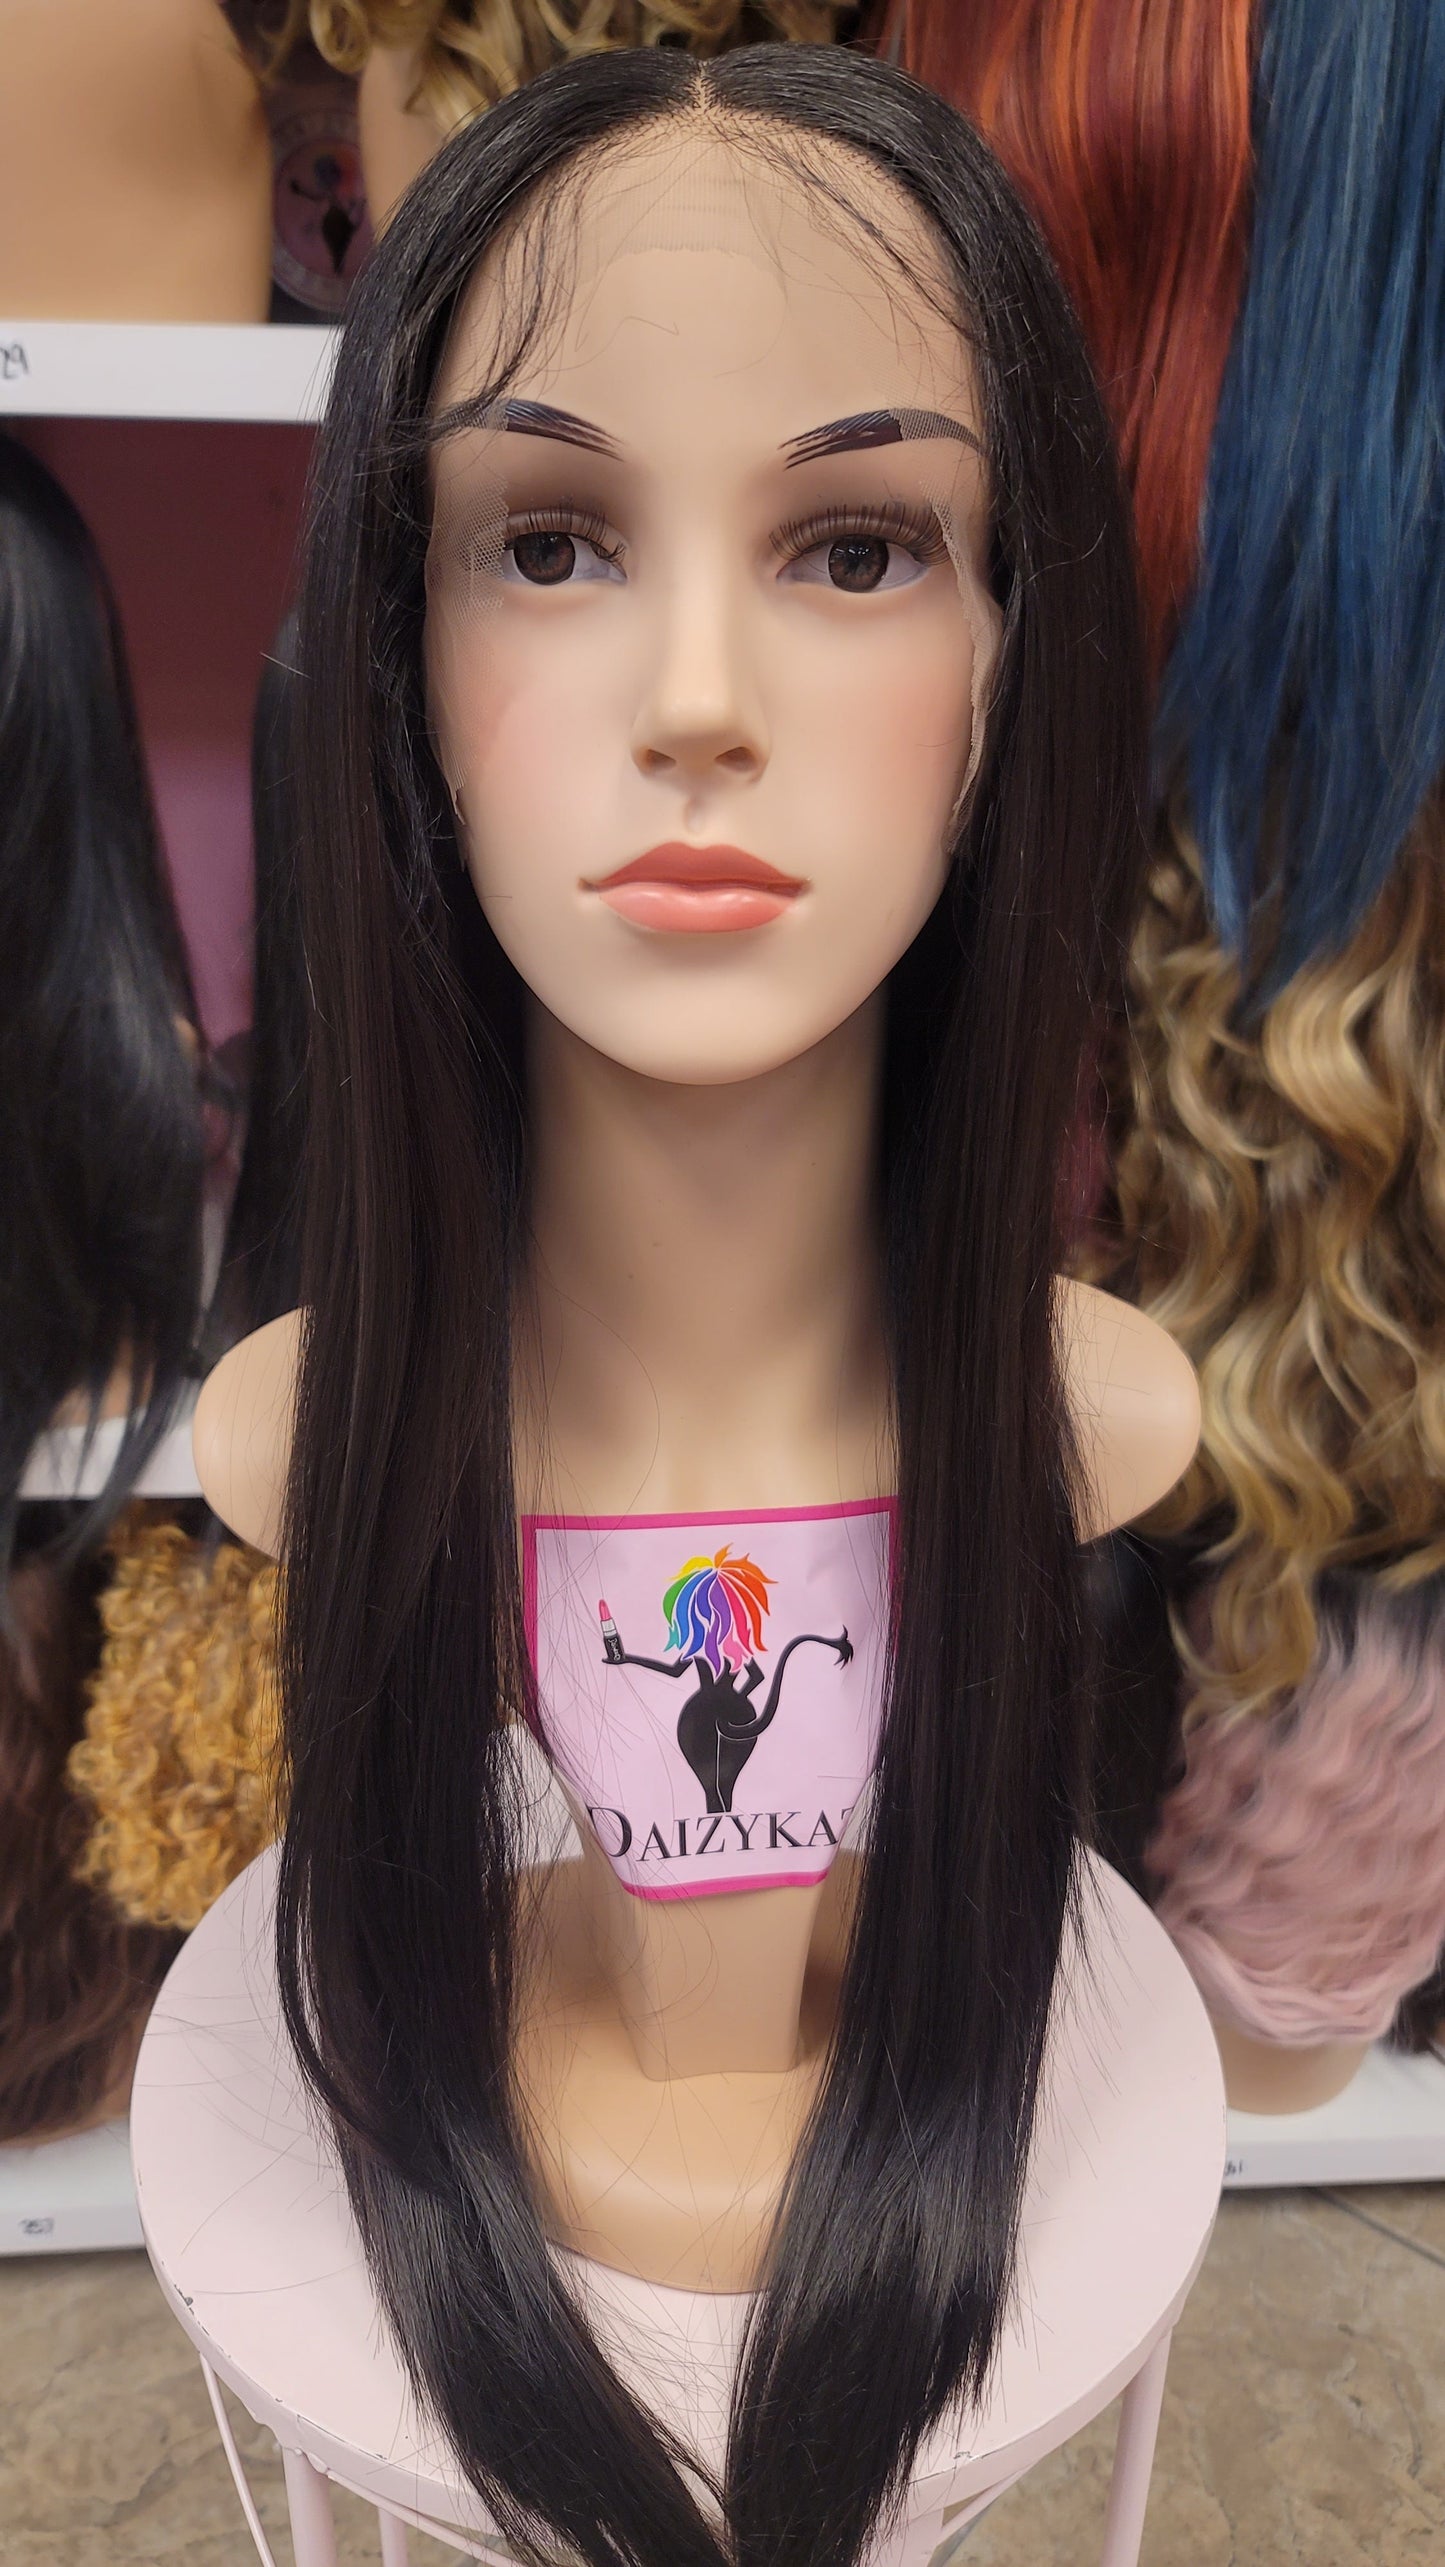 357 Alexa- Middle Part Lace Front Wig - 2 - DaizyKat Cosmetics 357 Alexa- Middle Part Lace Front Wig - 2 DaizyKat Cosmetics Wigs